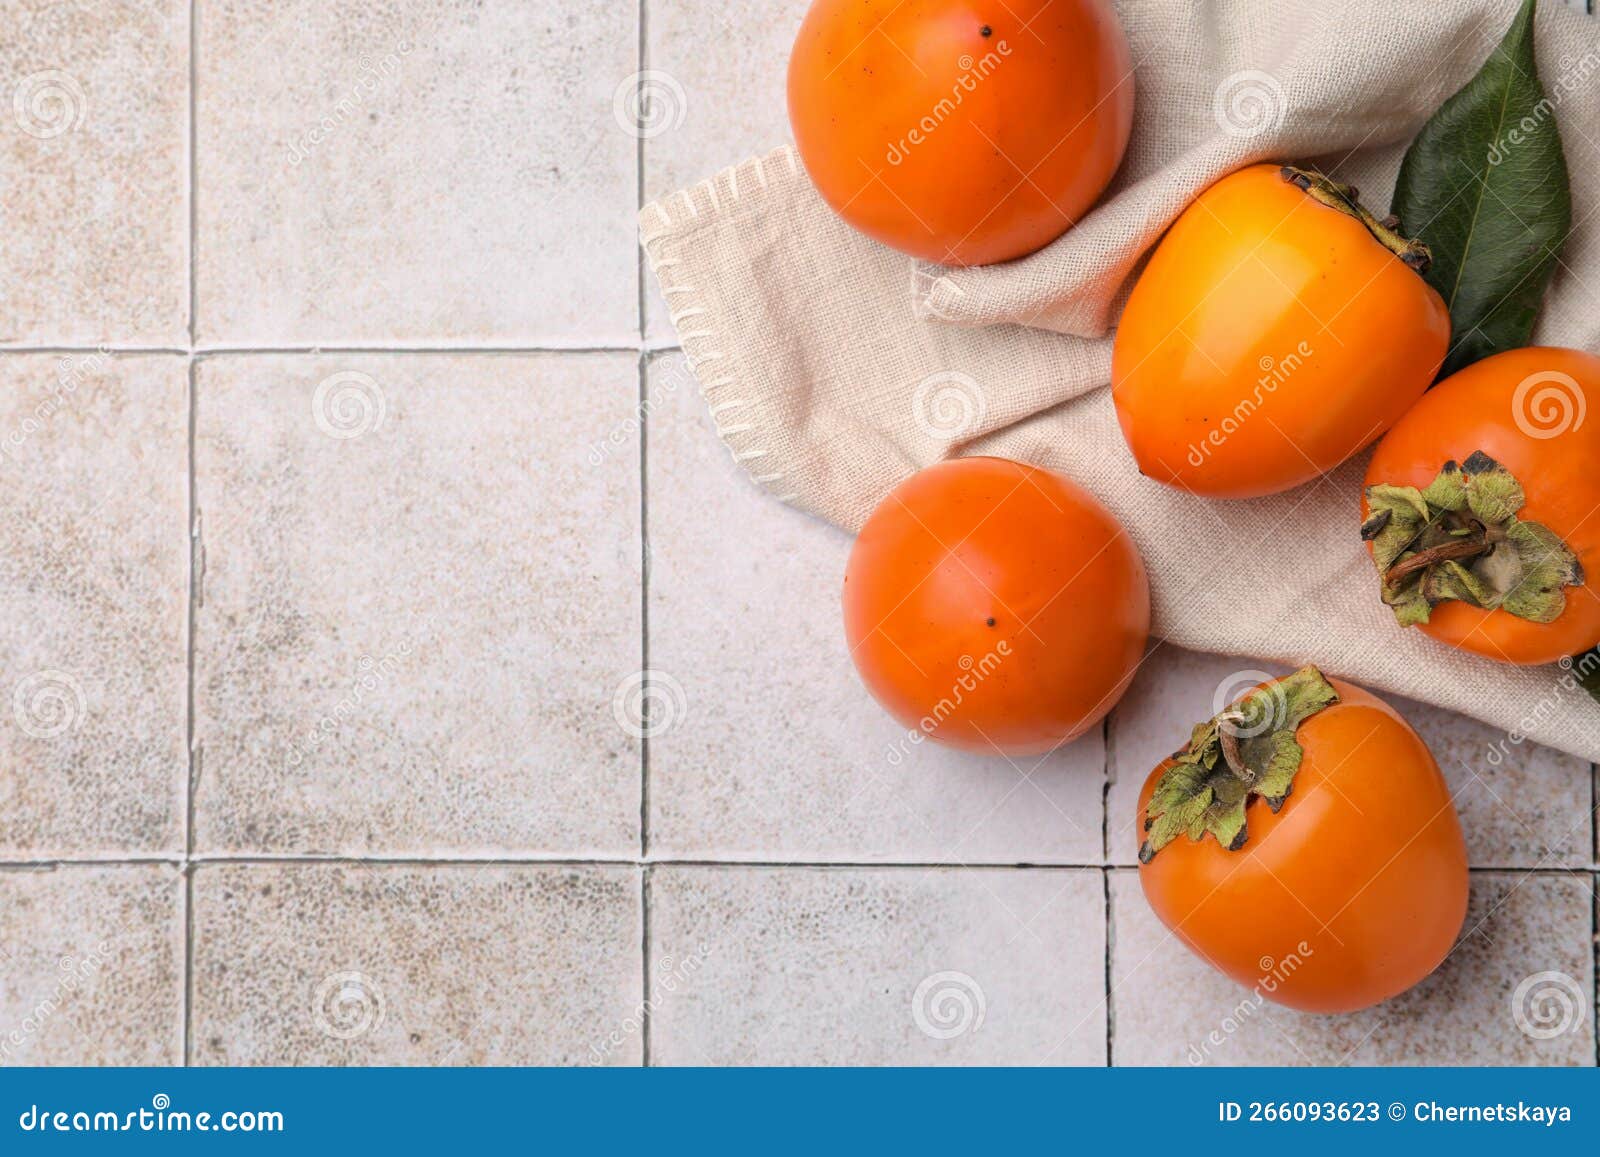 Delicious Ripe Juicy Persimmons on Tiled Surface, Flat Lay. Space for ...